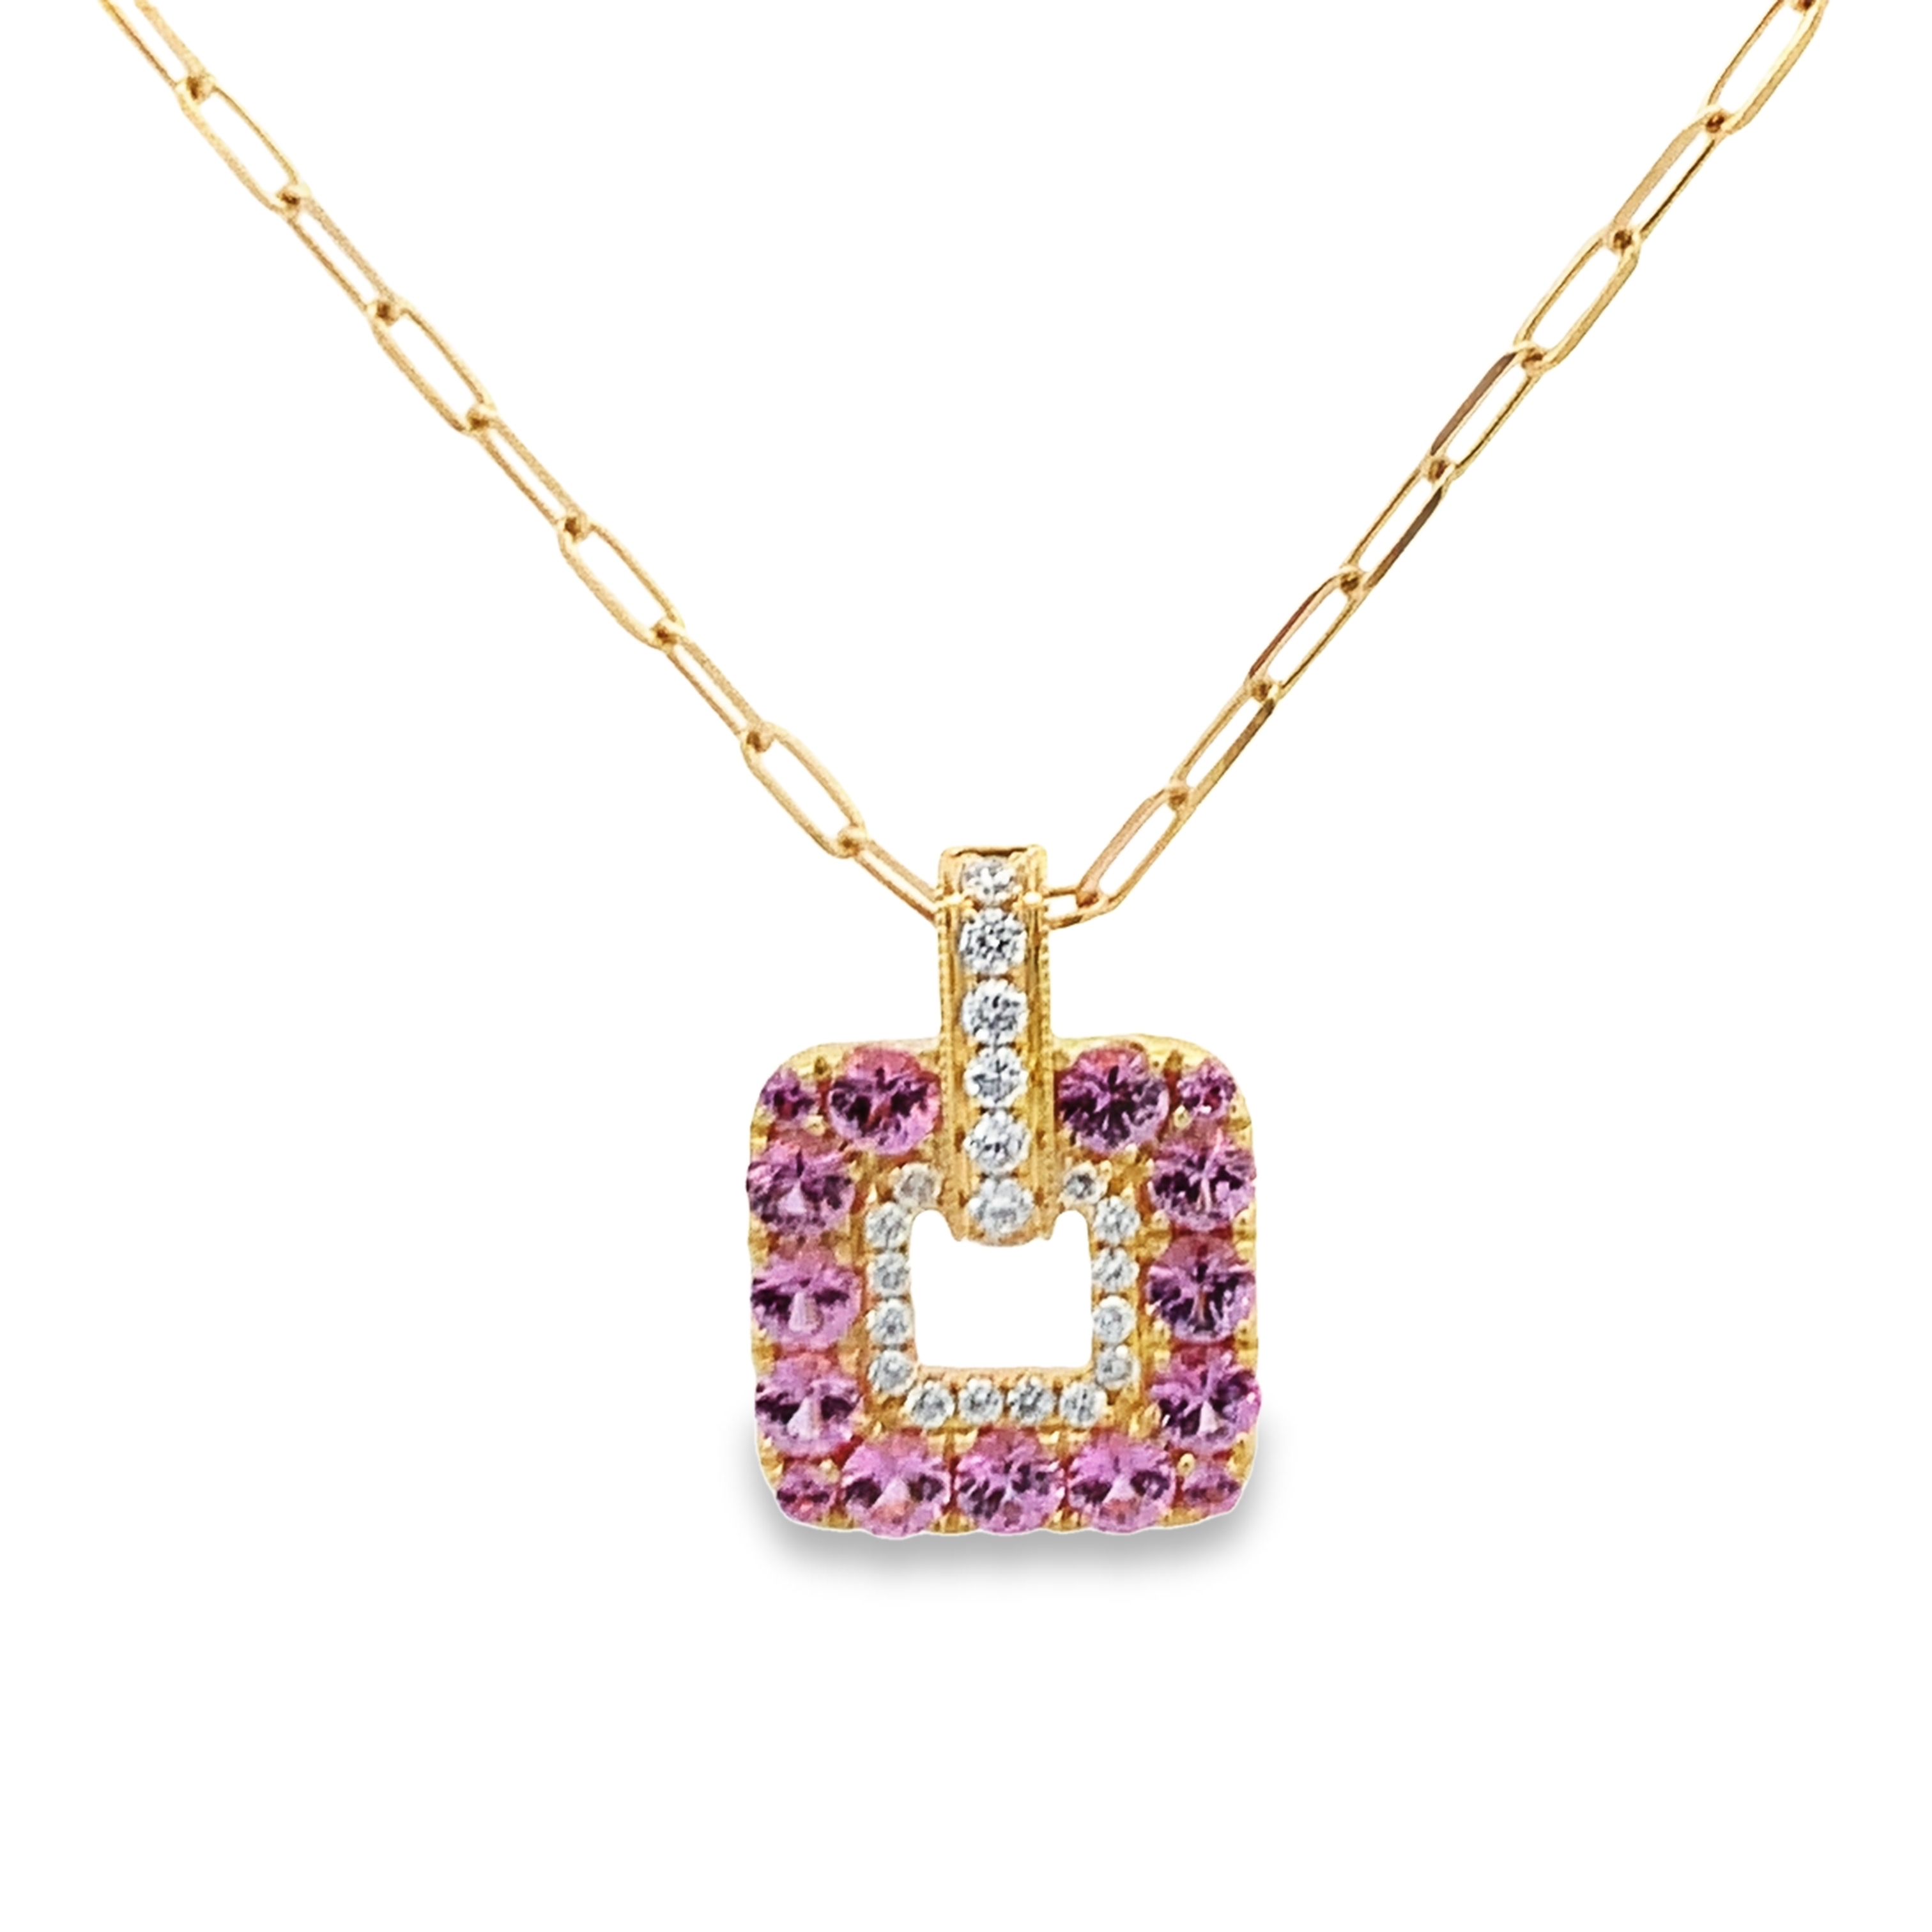 Frederic Sage 14K Yellow Gold Square Pink Sapphire Pendant Necklace